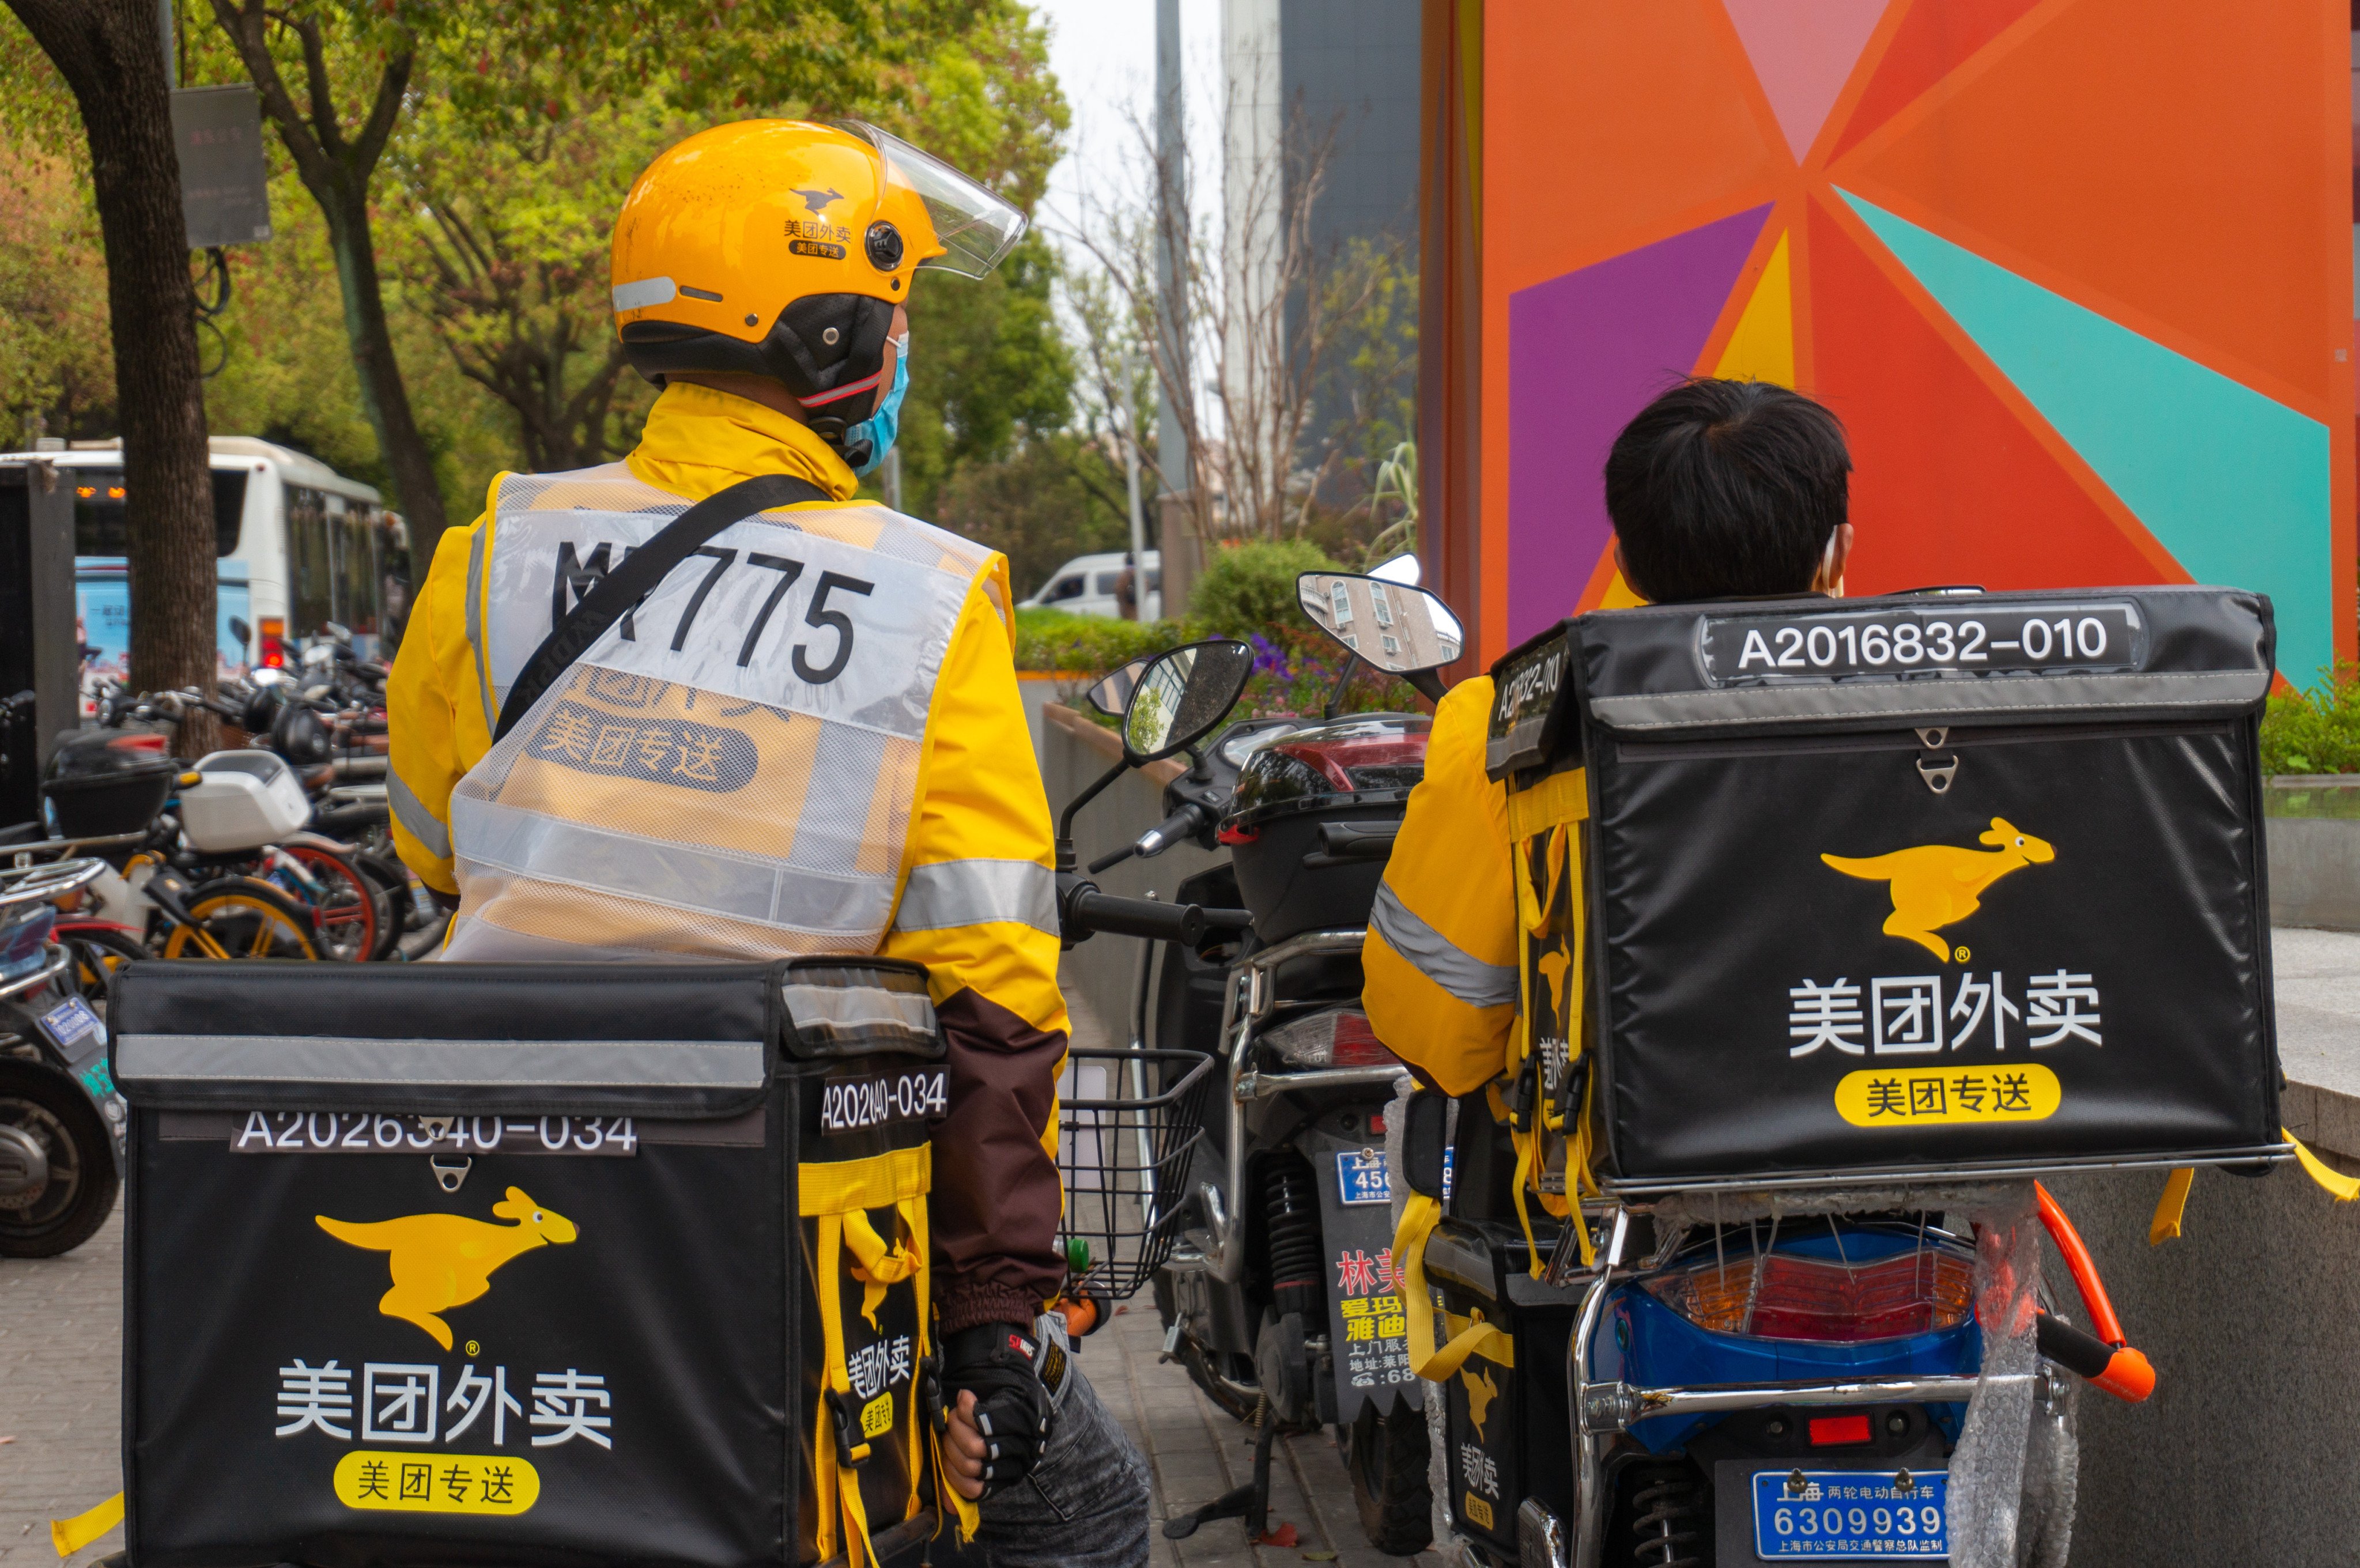 Meituan lost about 20 per cent of its market value over the past two trading days since the National Development and Reform Commission issued its directive on cutting commission fees. Photo: Shutterstock